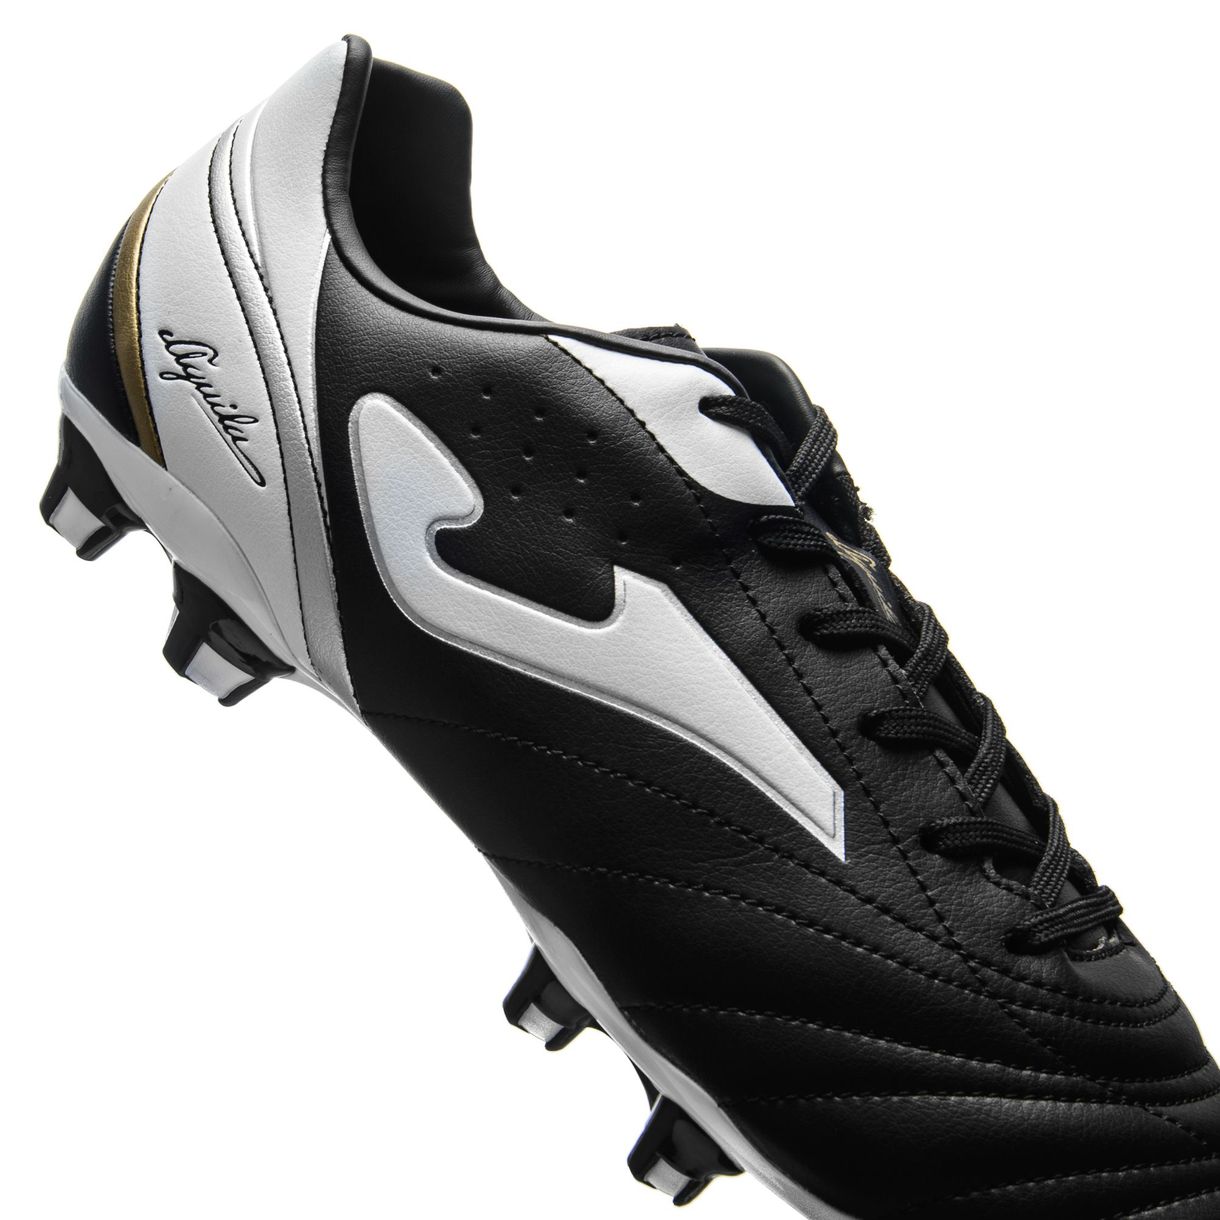 Authentic Joma Turf Soccer Shoes Aguila 601 Color Black 